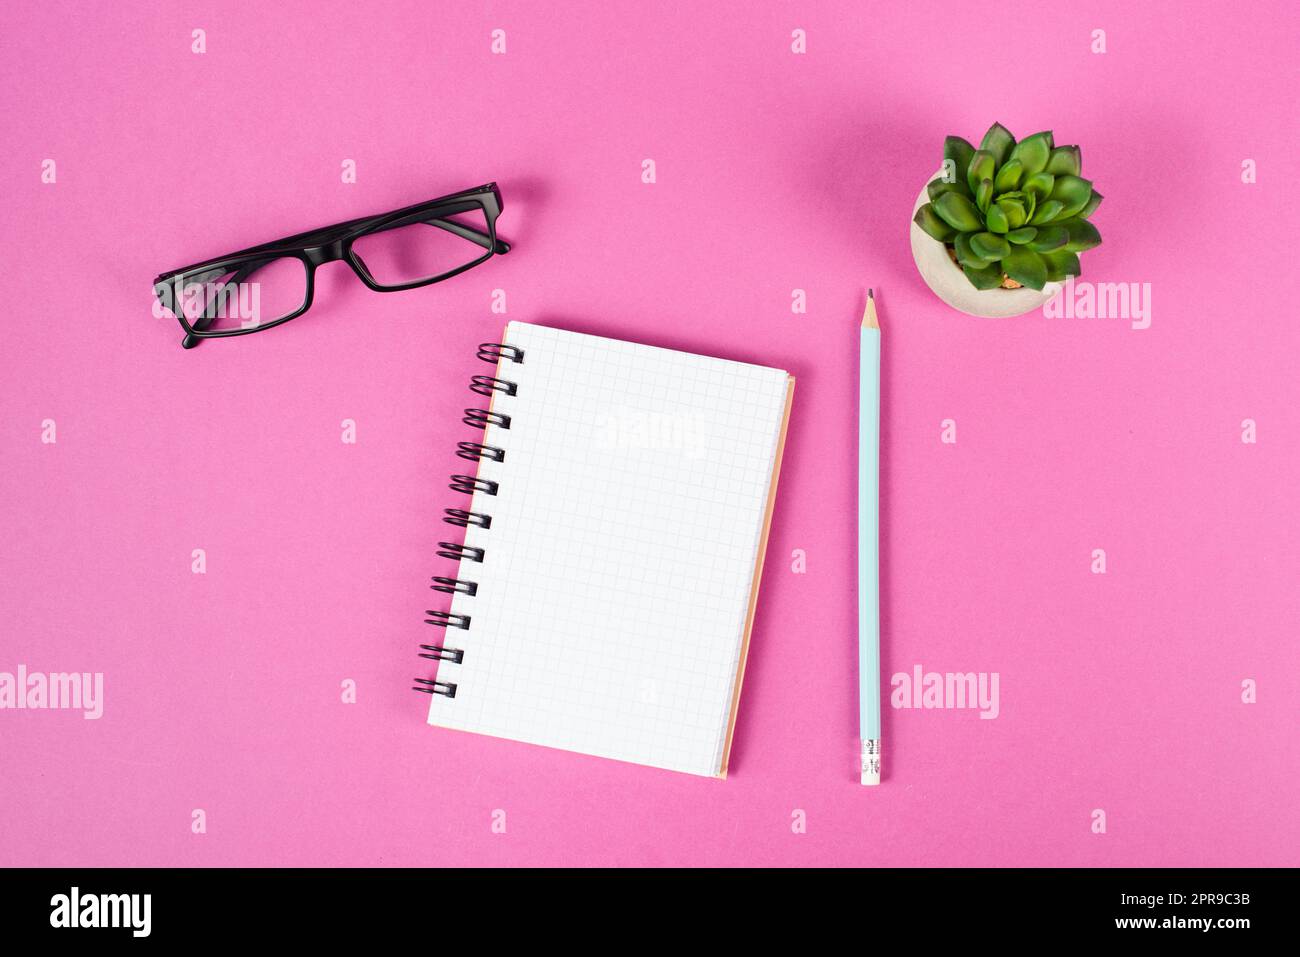 Empty notebook with a pen, eyeglasses and a cactus on a pink background, brainstorming for new ideas, writing a message, taking a break, home office desk Stock Photo